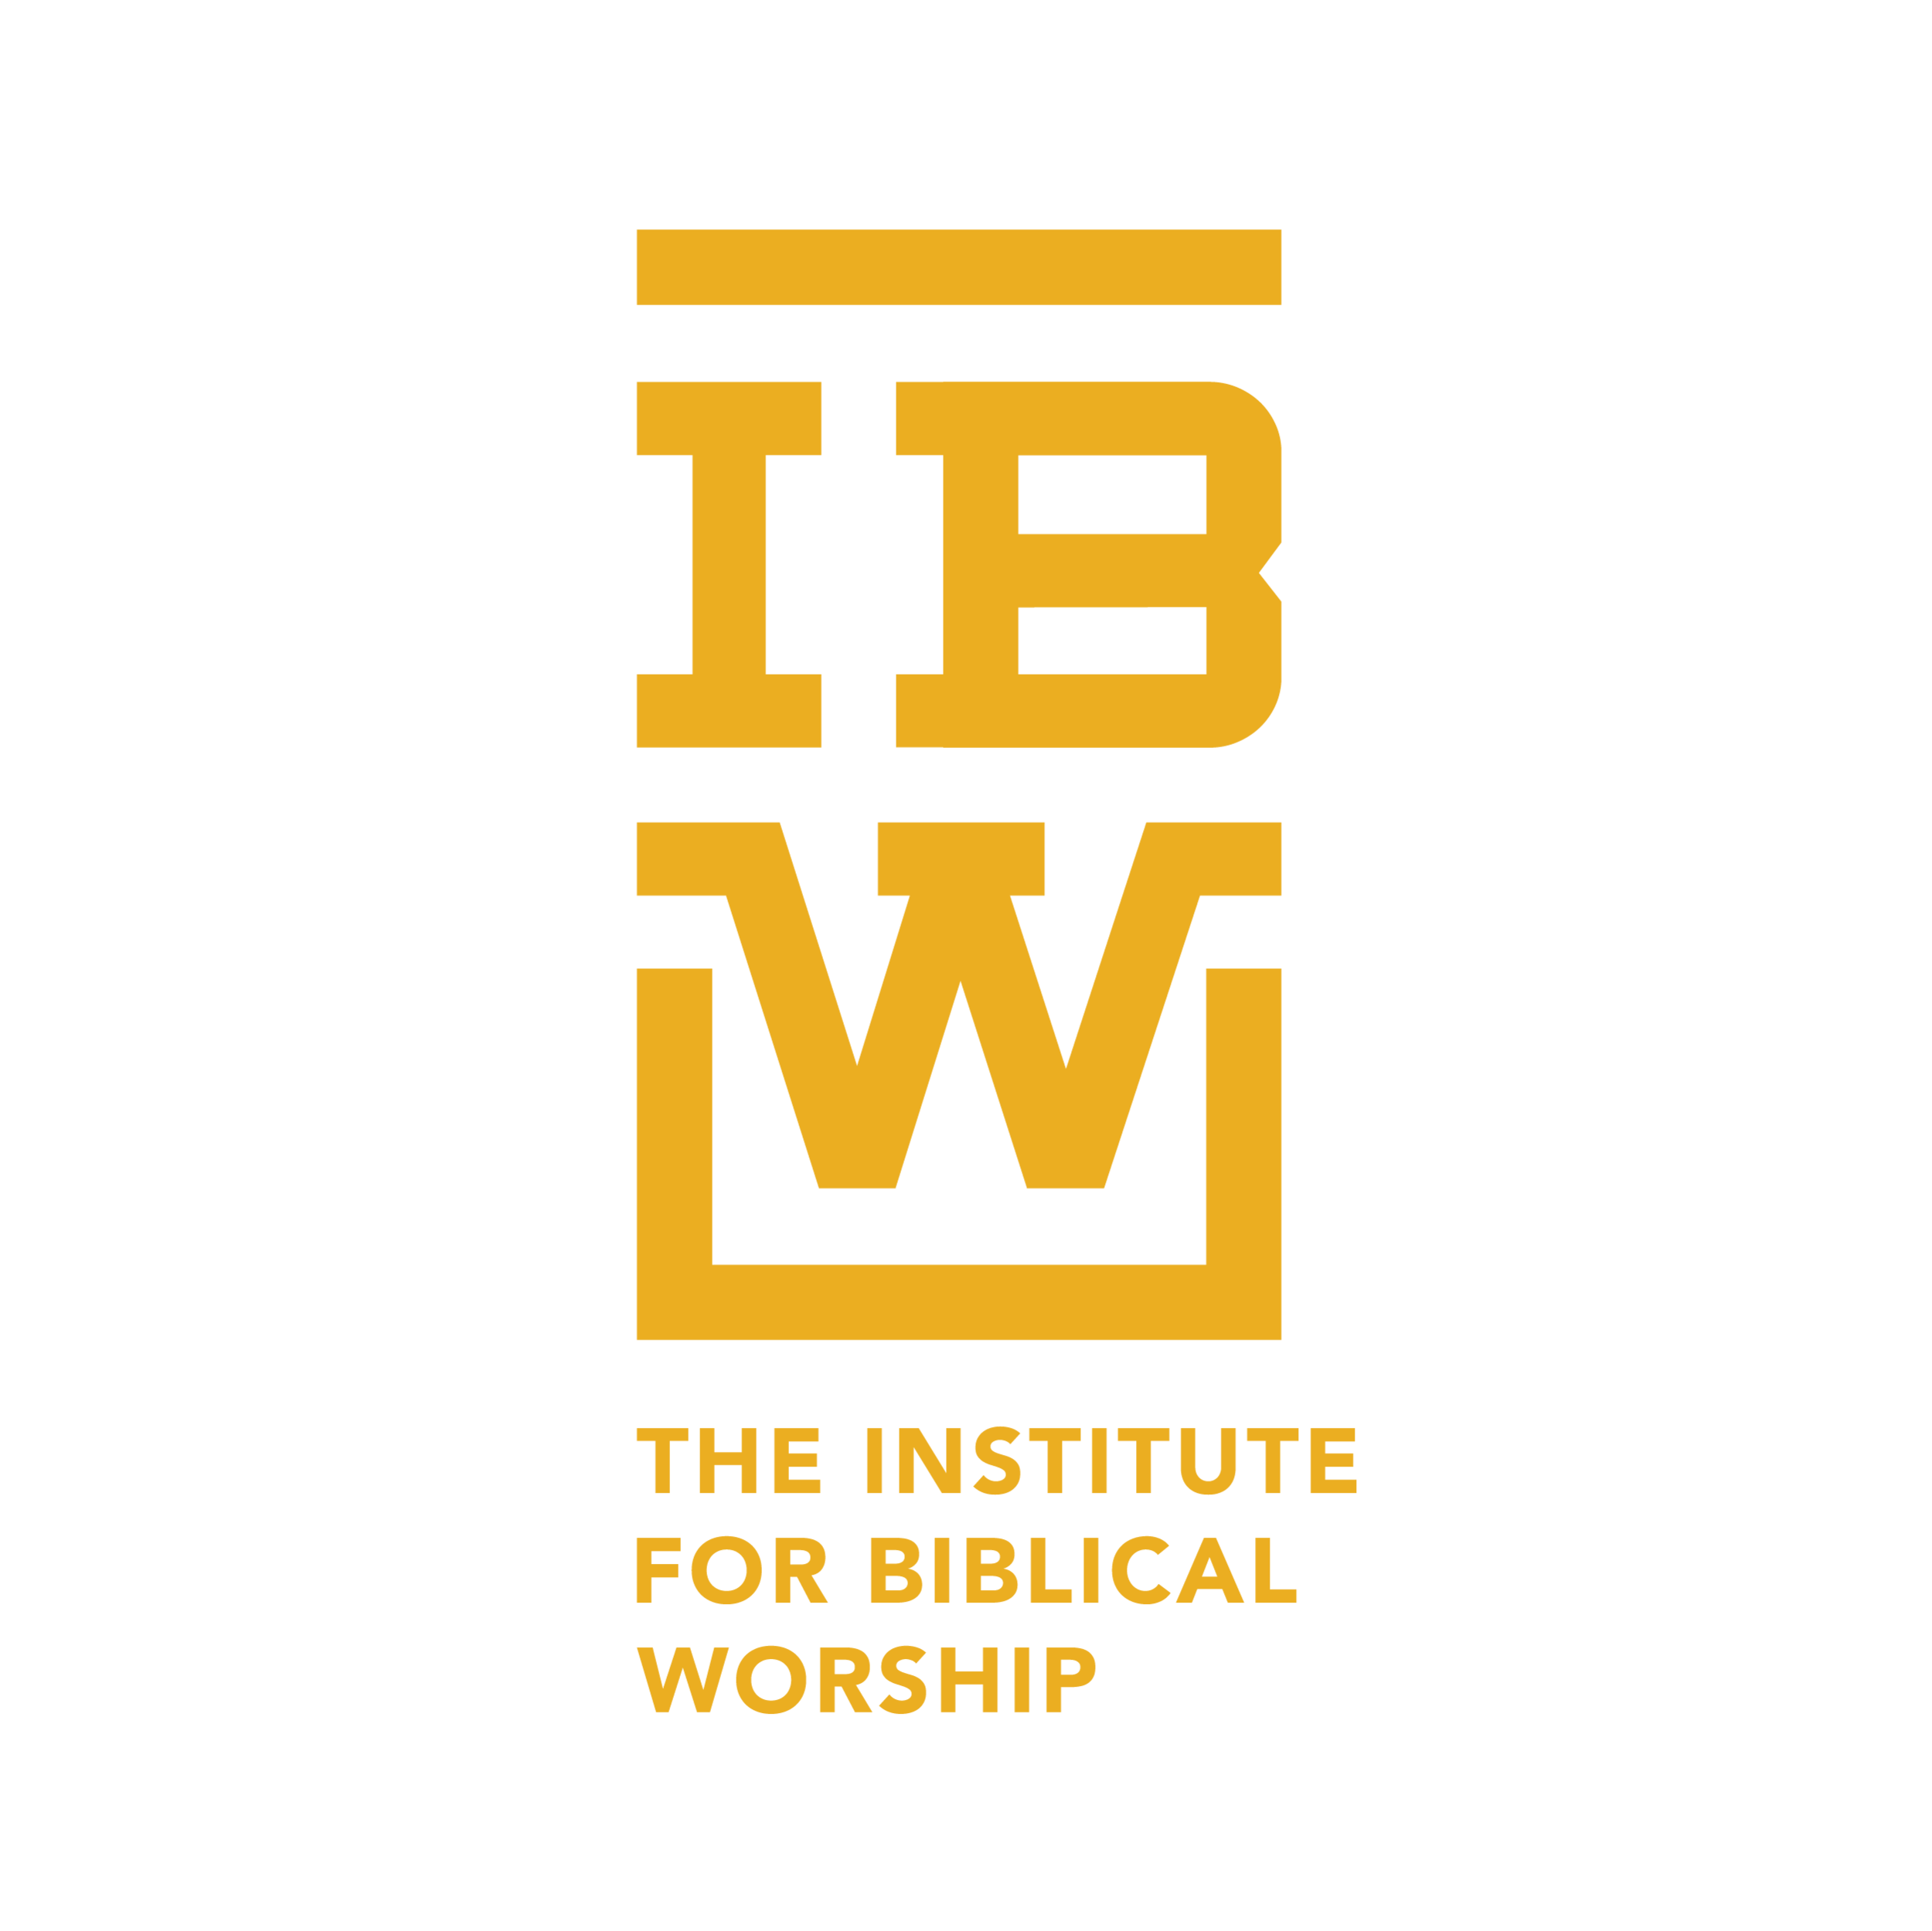 The Institute for Biblical Worship